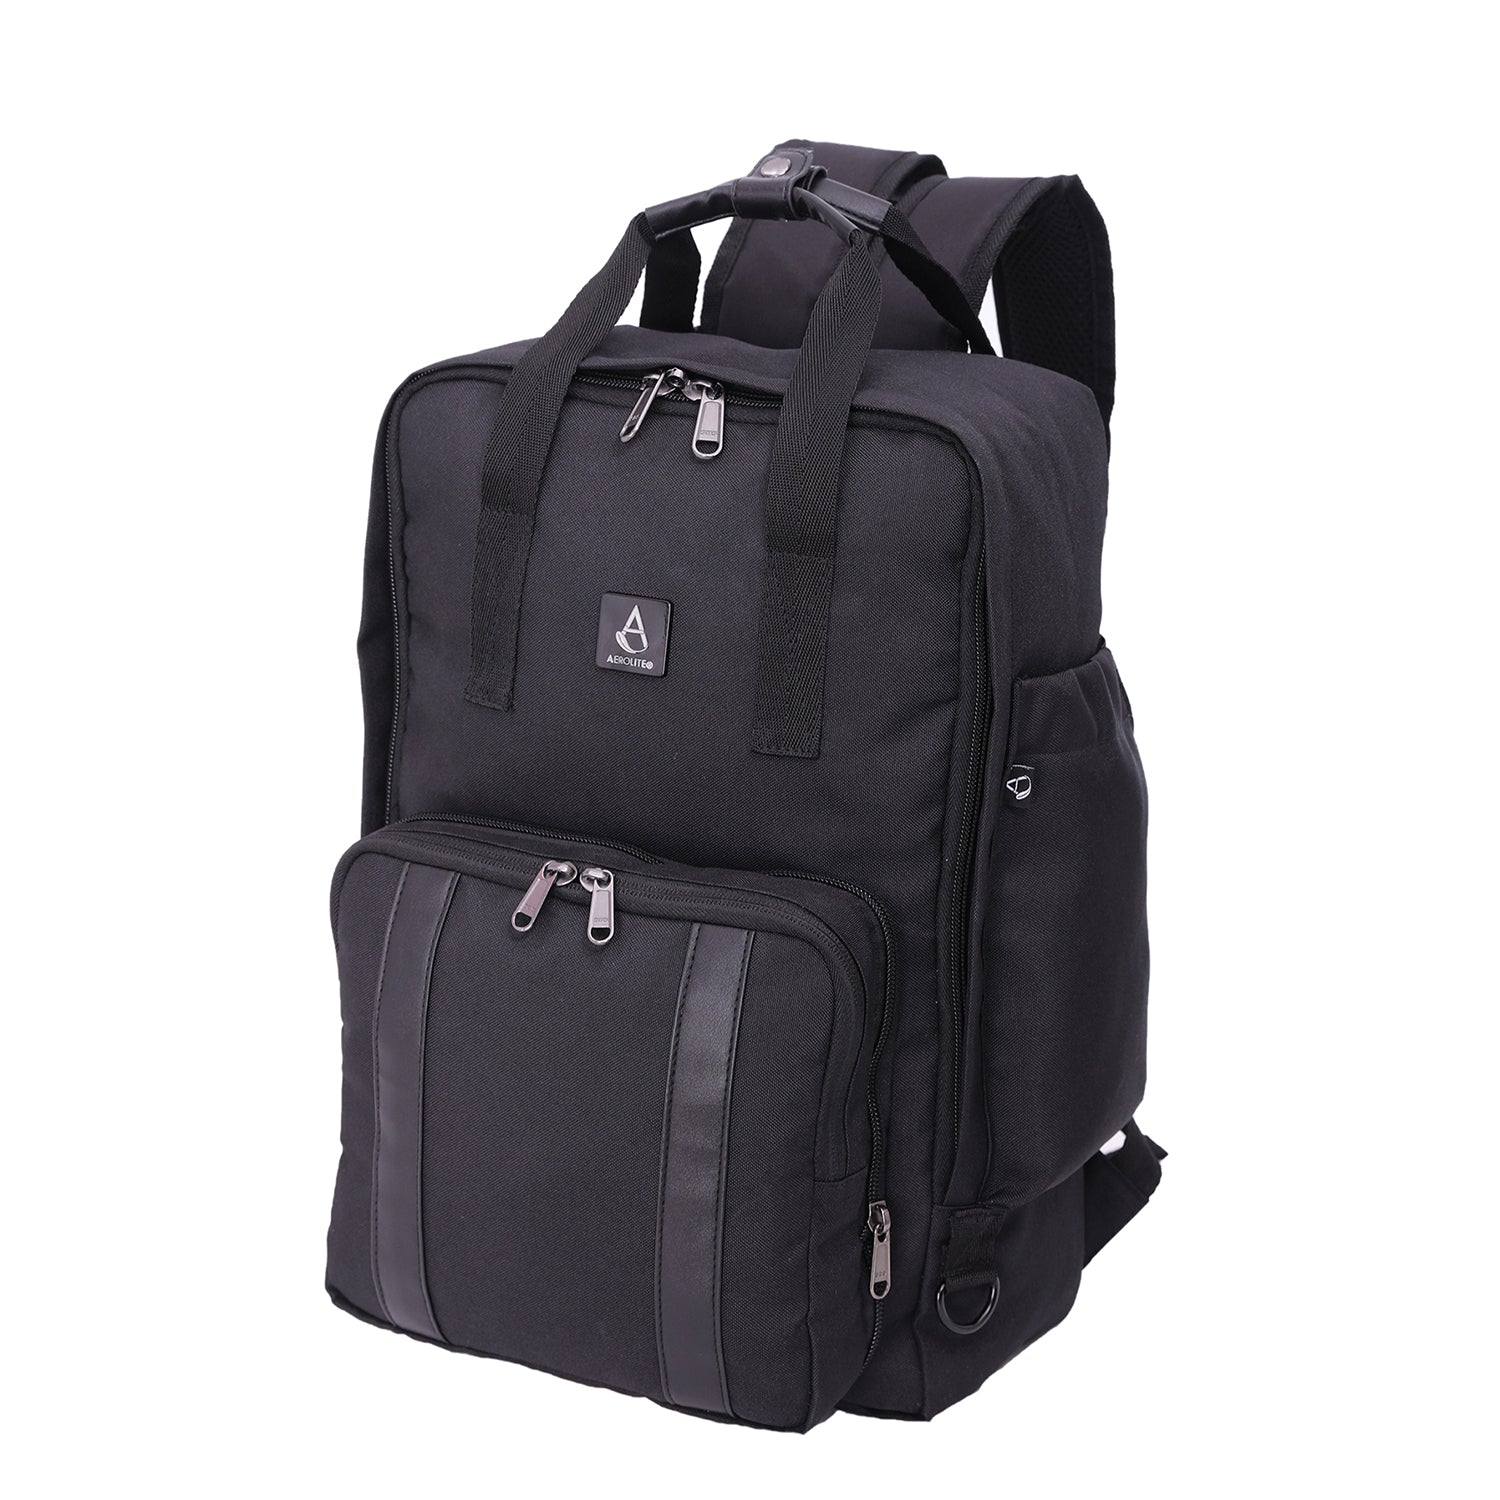 Aerolite 40x20x25 Ryanair Maximum Size Backpack With Removable Small Carry Pouch Eco-Friendly Shower-Resistant Cabin Luggage Approved Travel Carry On Holdall Flight Rucksack with 10 Year Warranty